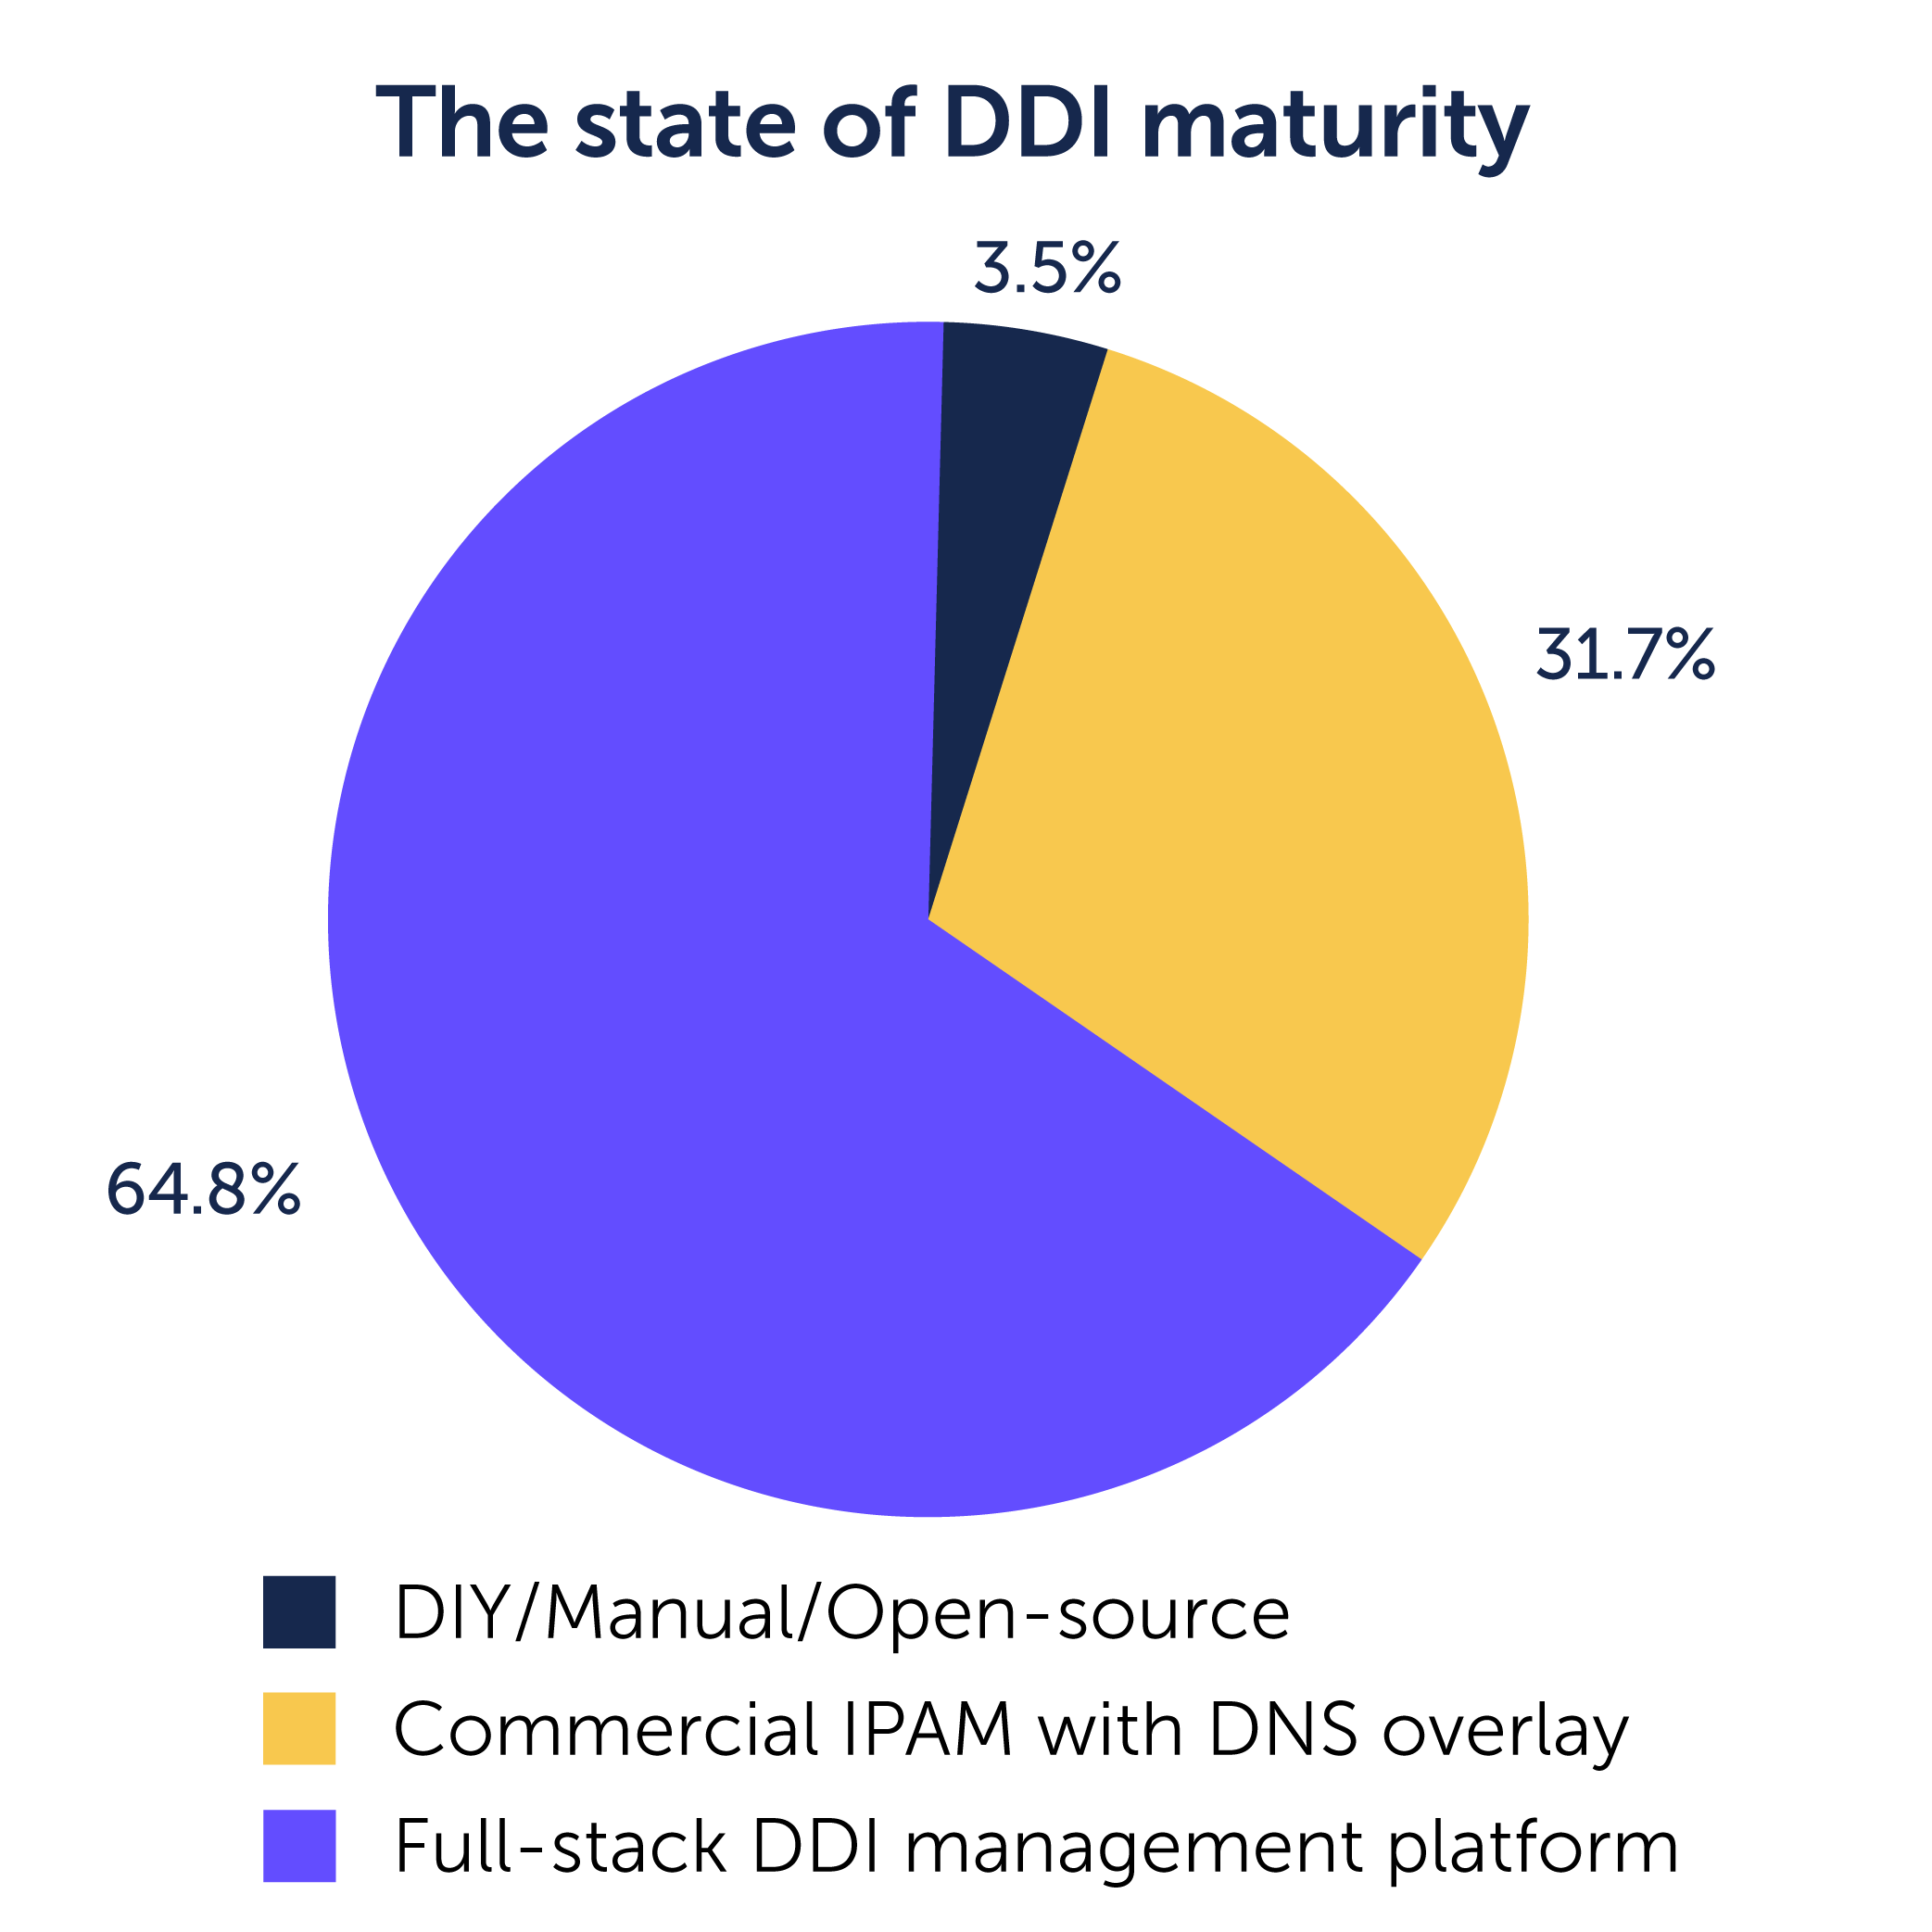 Pie chart of the state of DDI maturity for DIY, commercial IPAM with DNS overlay, and full-stack DDI platform